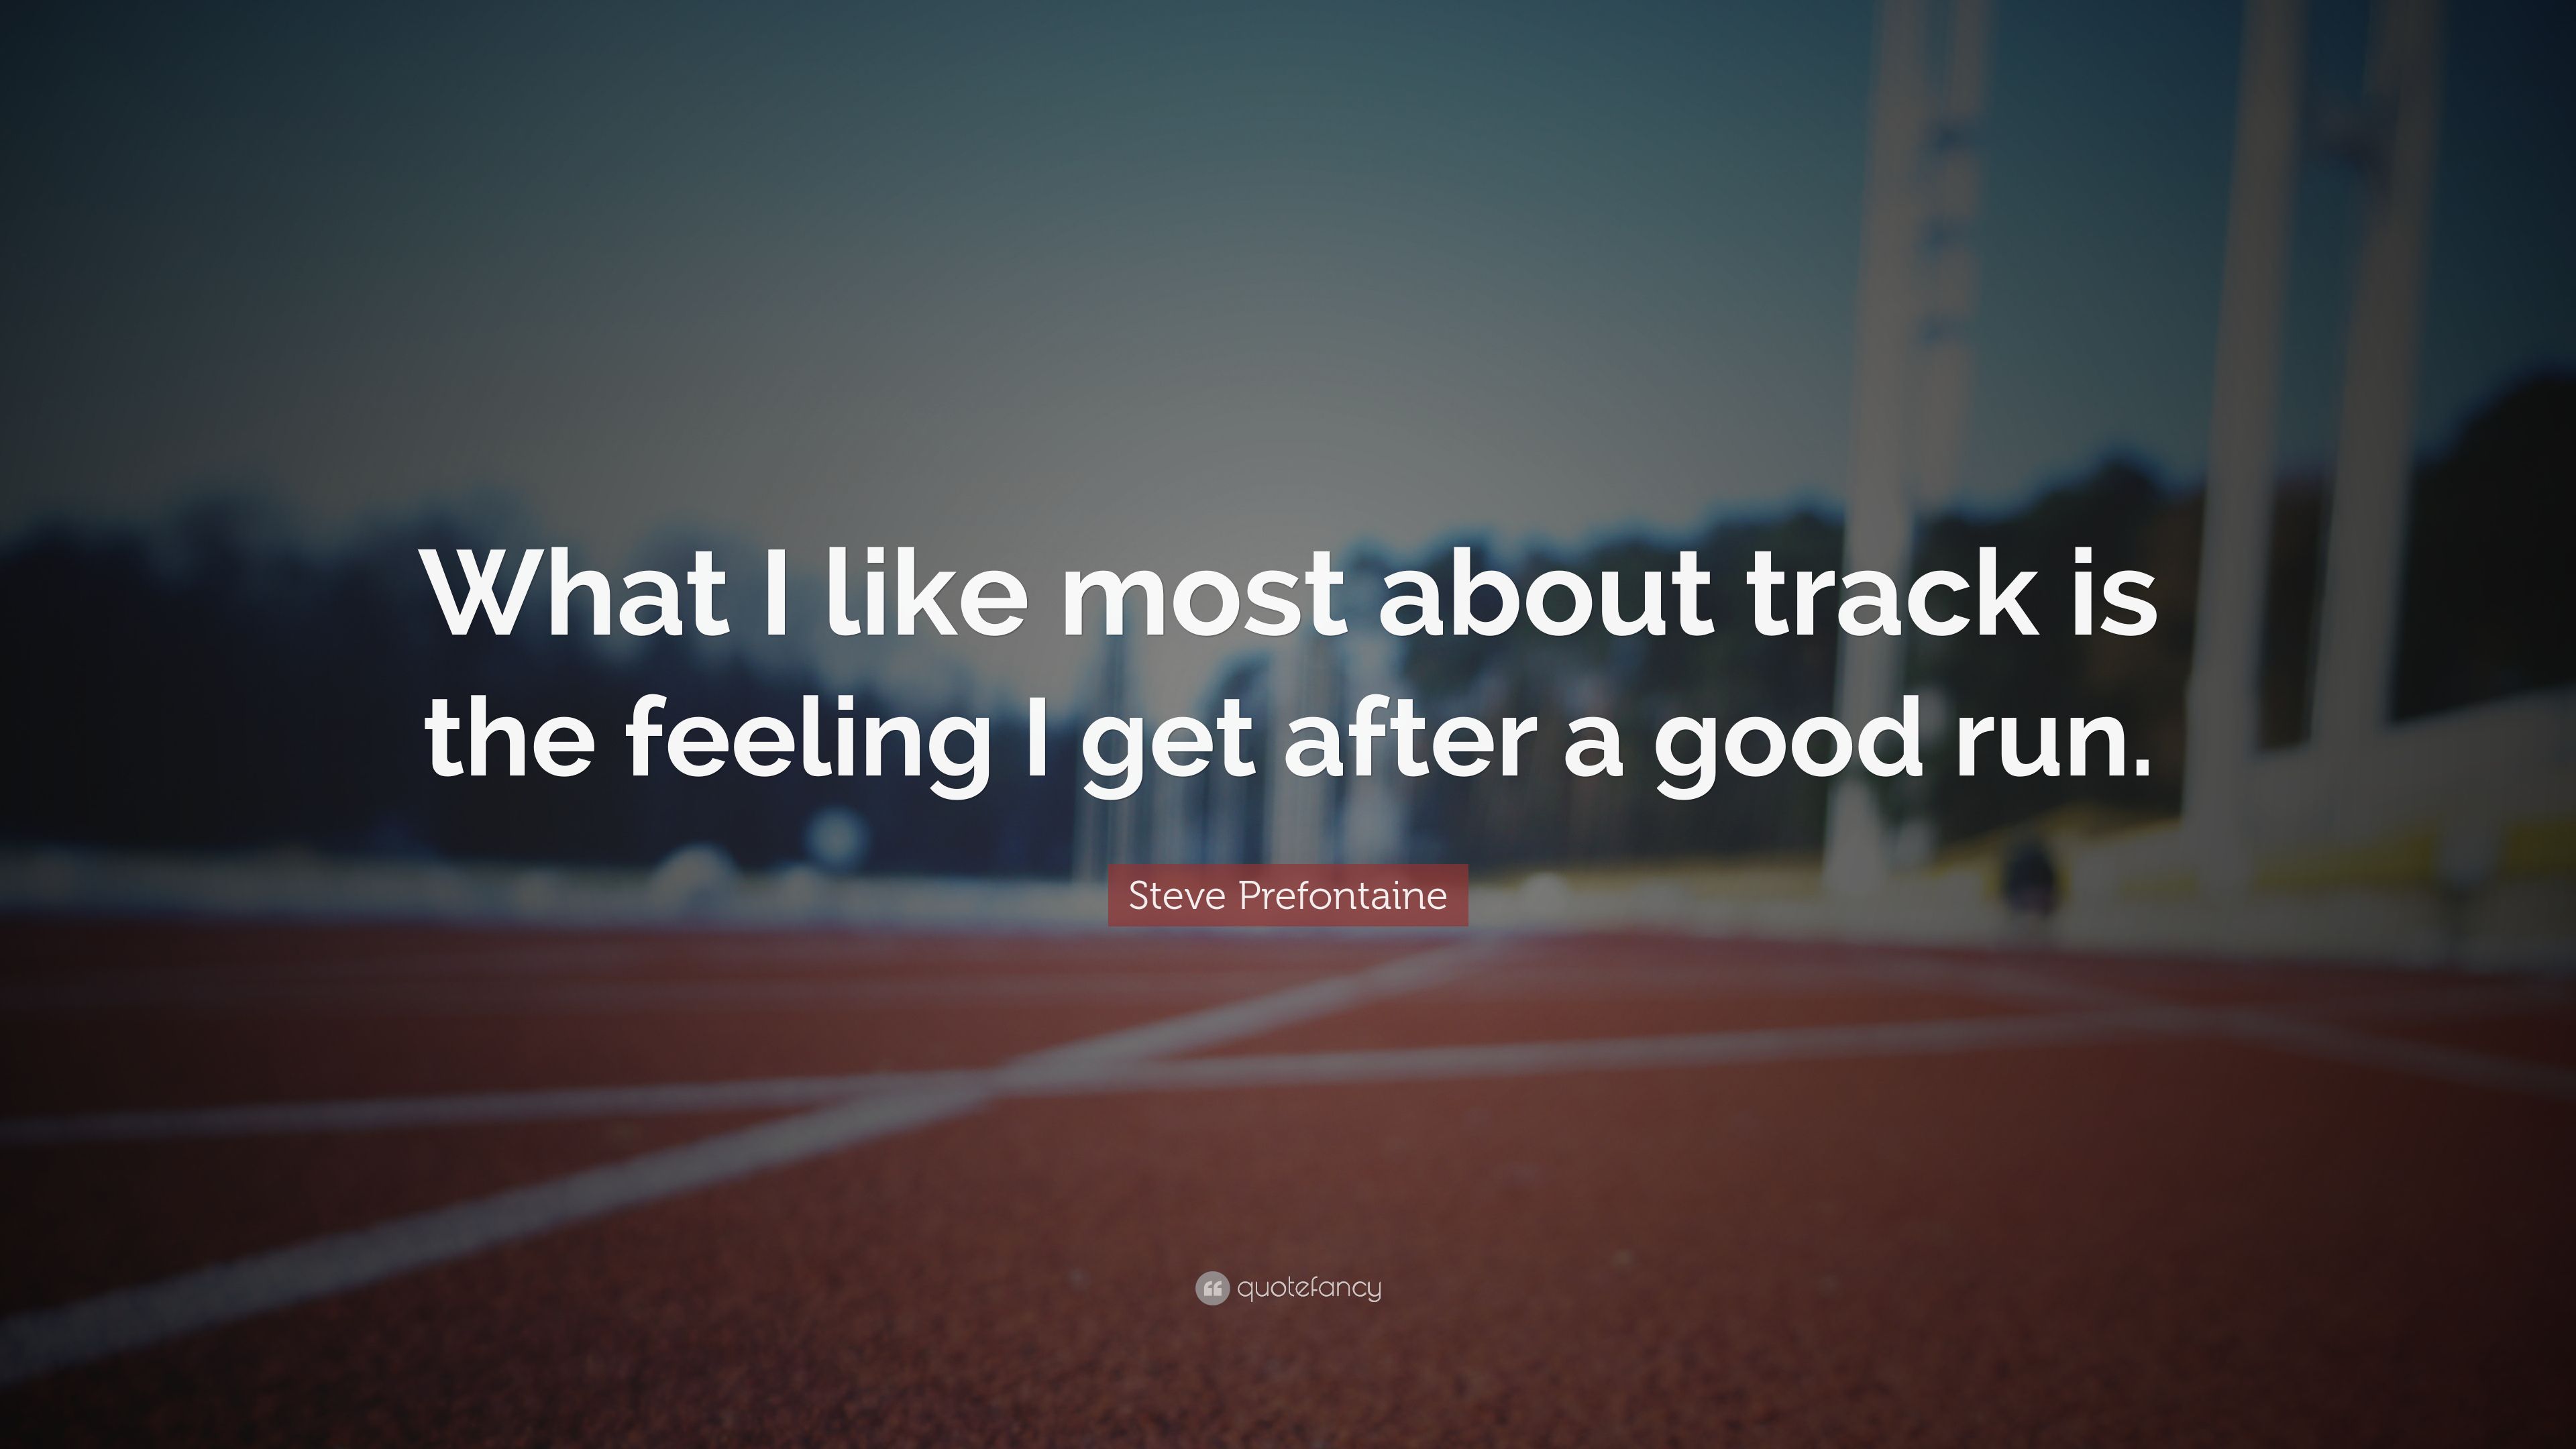 Steve Prefontaine Quote: “What I like .quotefancy.com